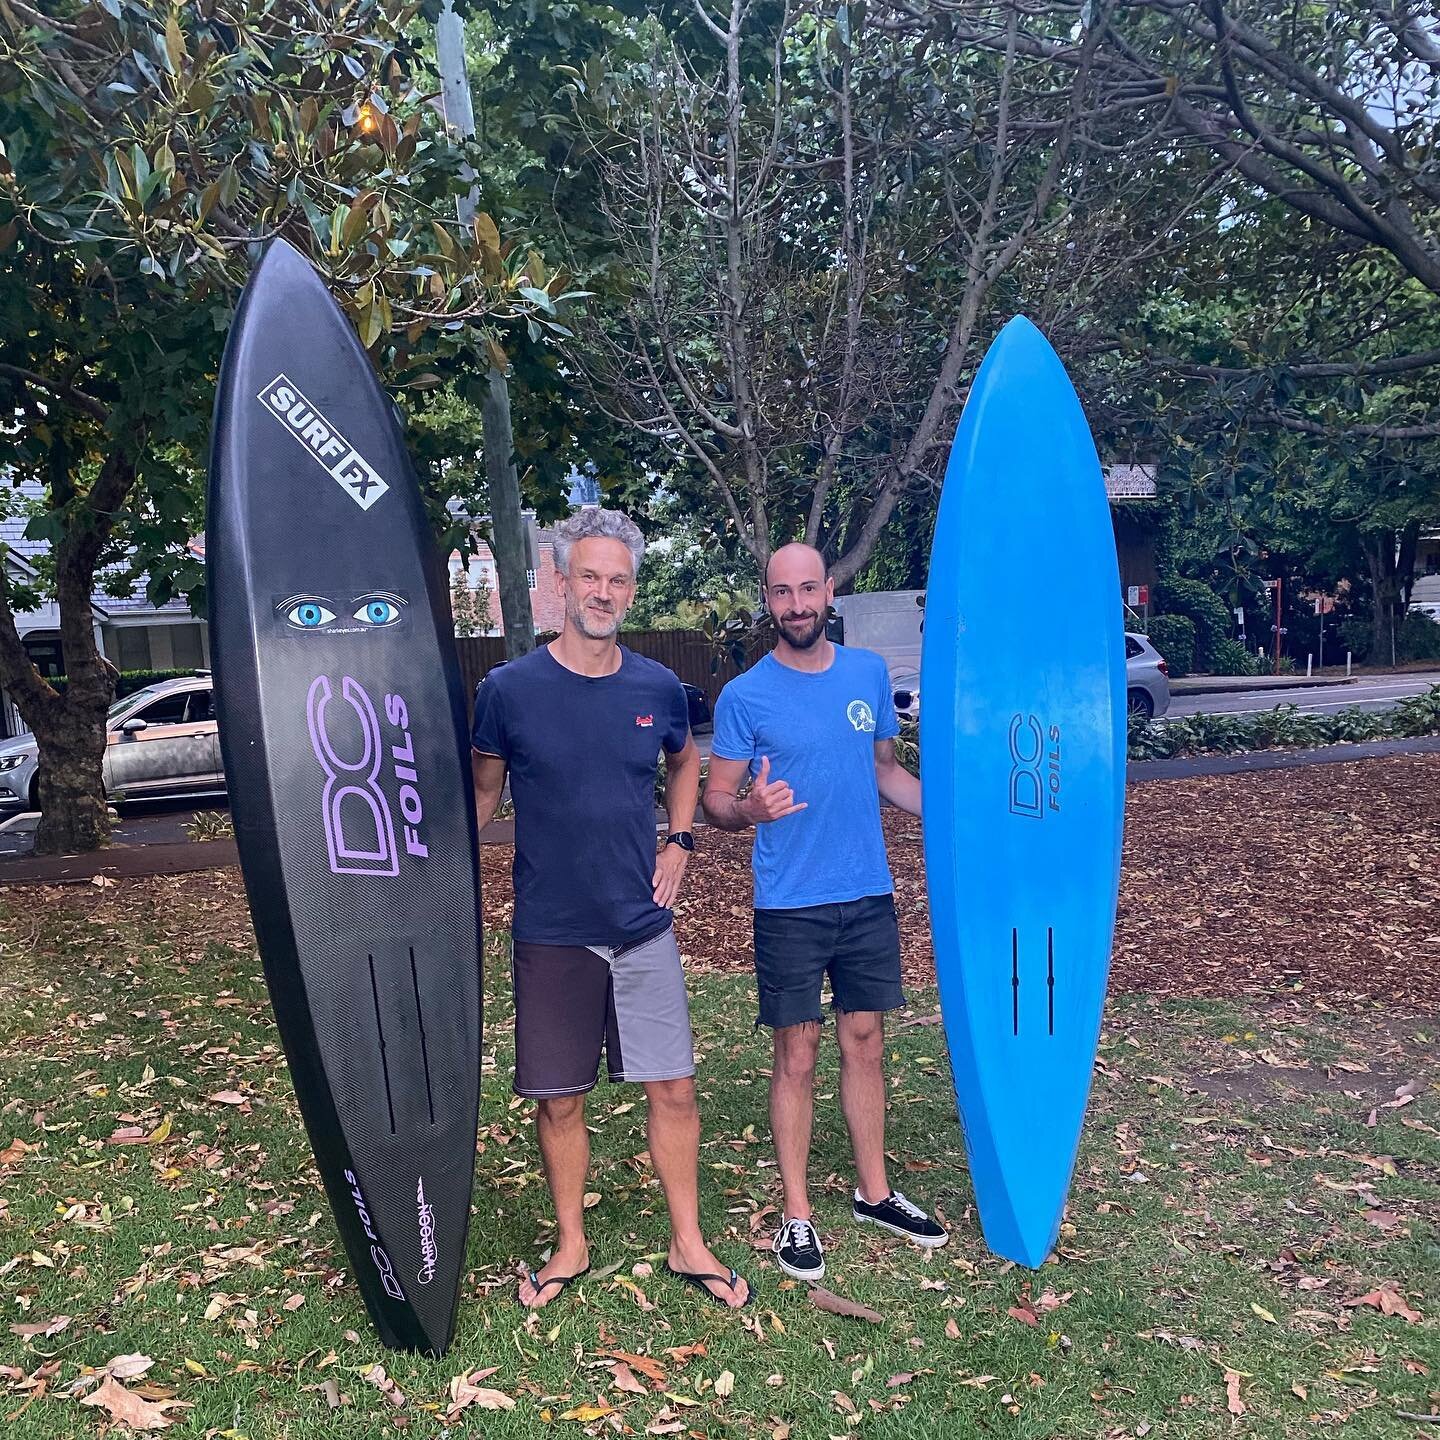 Absolutely stoked to meet these guys at the DC Demo afternoon at Middle Harbour Yacht Club, Mosman Sydney recently. Top guys 🙌 we were super impressed with their enthusiasm for the sport, they both paddled the DC Harpoon so well! Awesome boys!!!
#dc